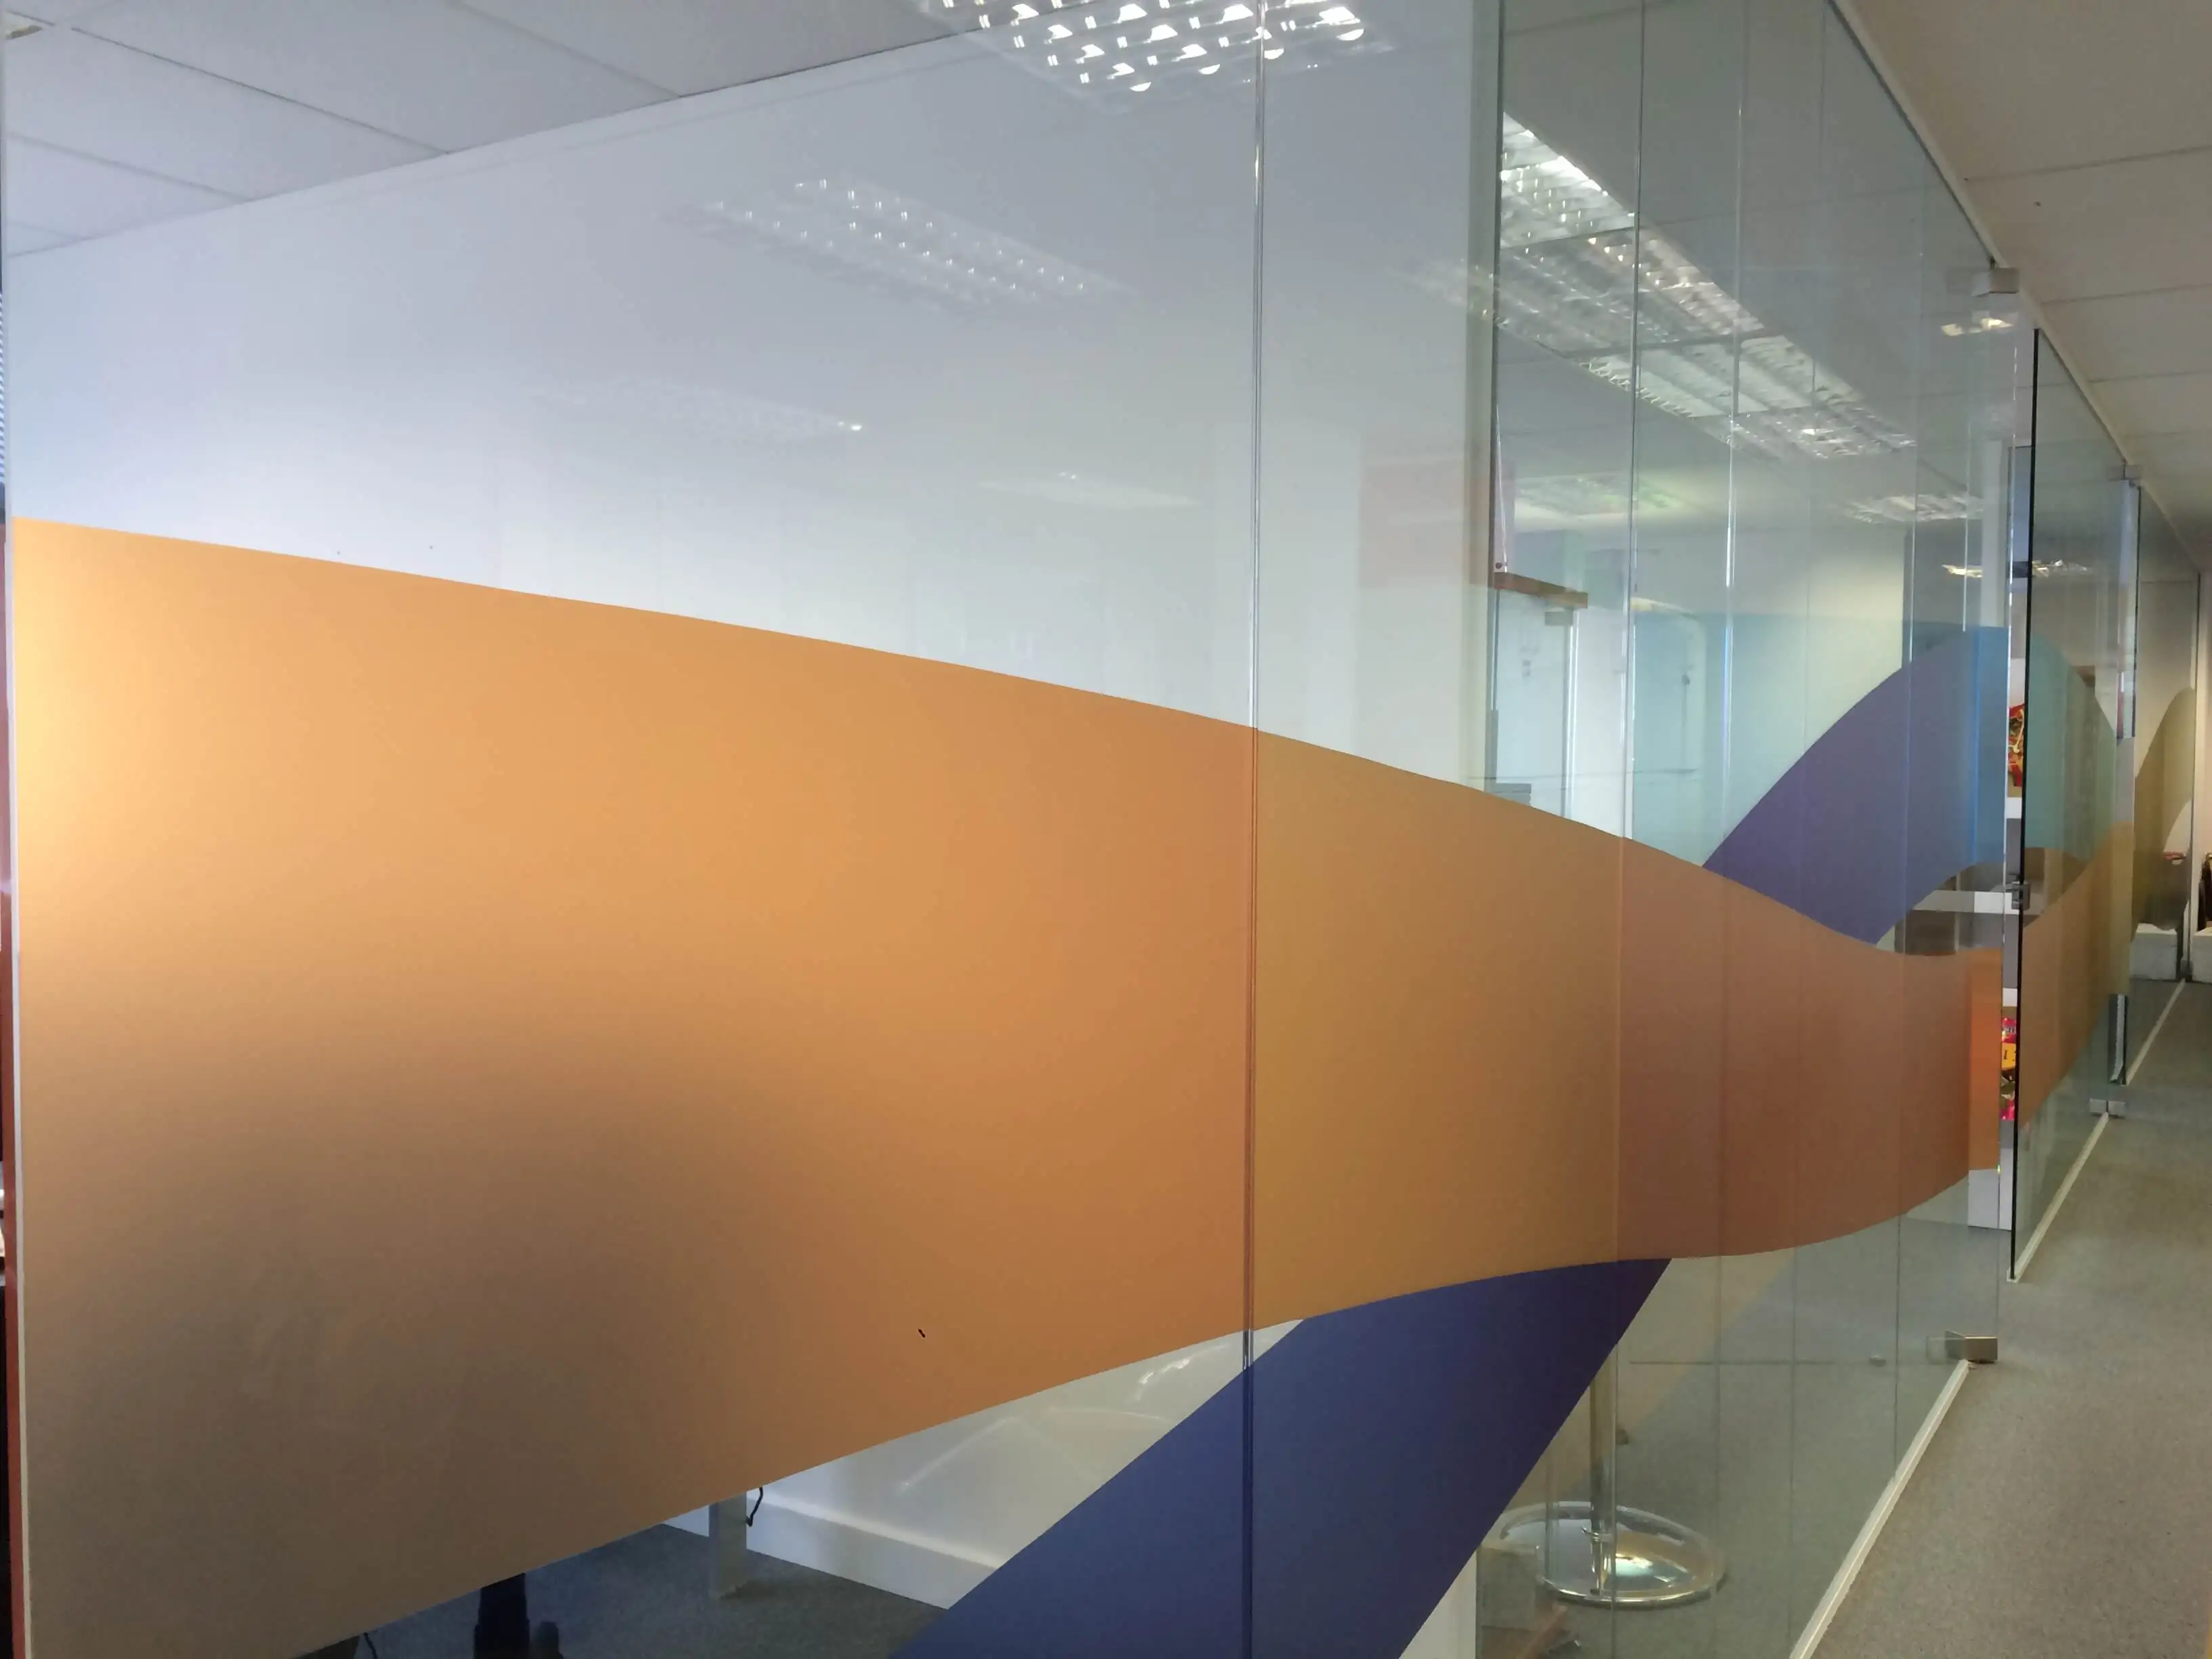 Kohinoor office glass partitions with designer manifestation